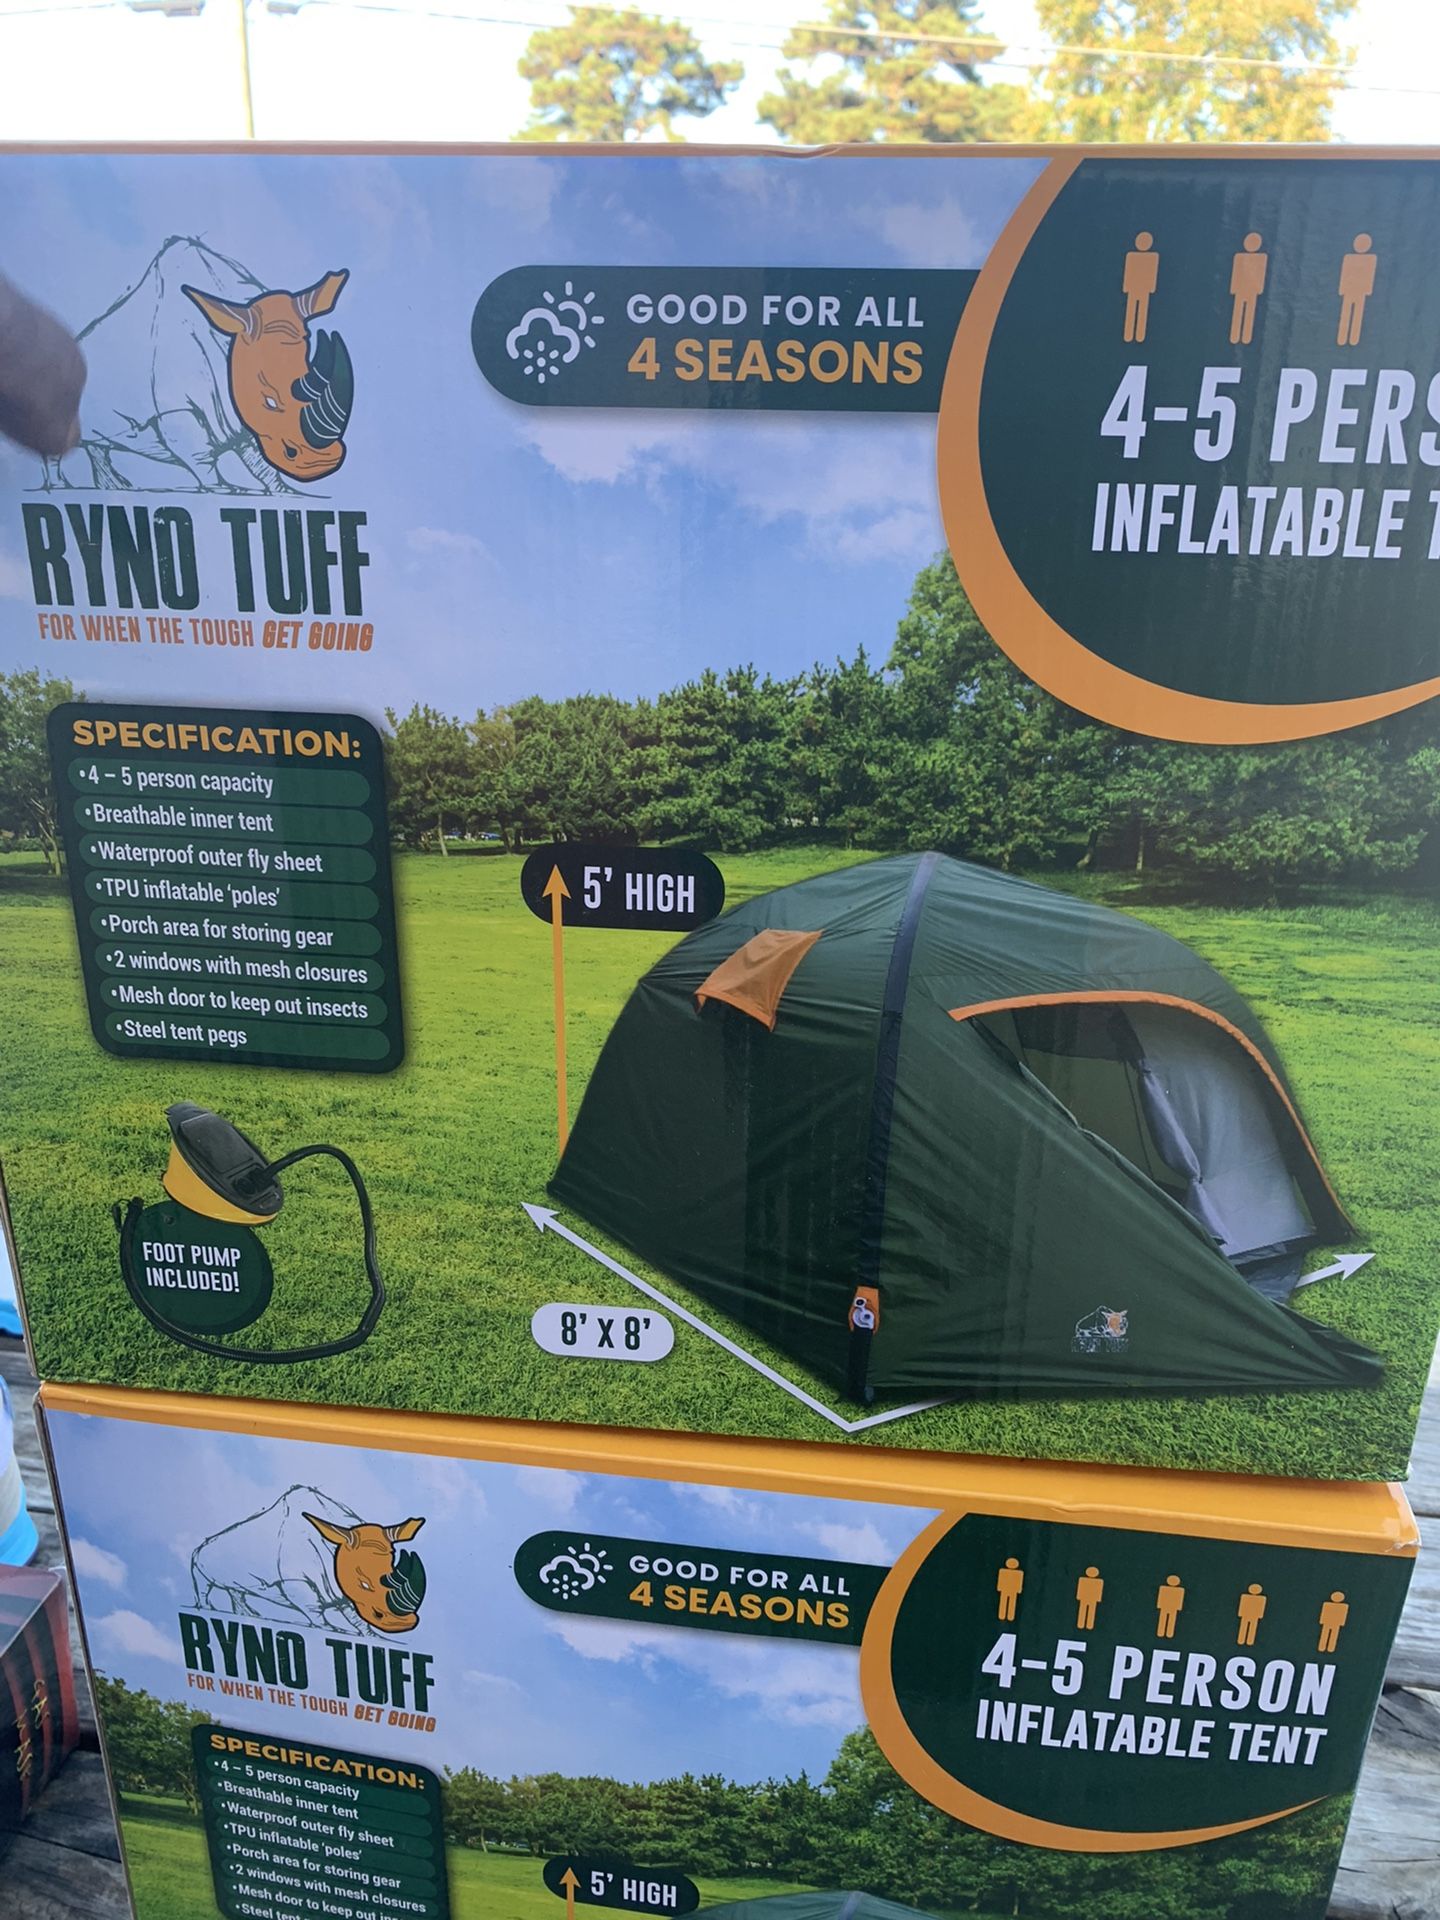 4-5 Person Inflatable Tent $45